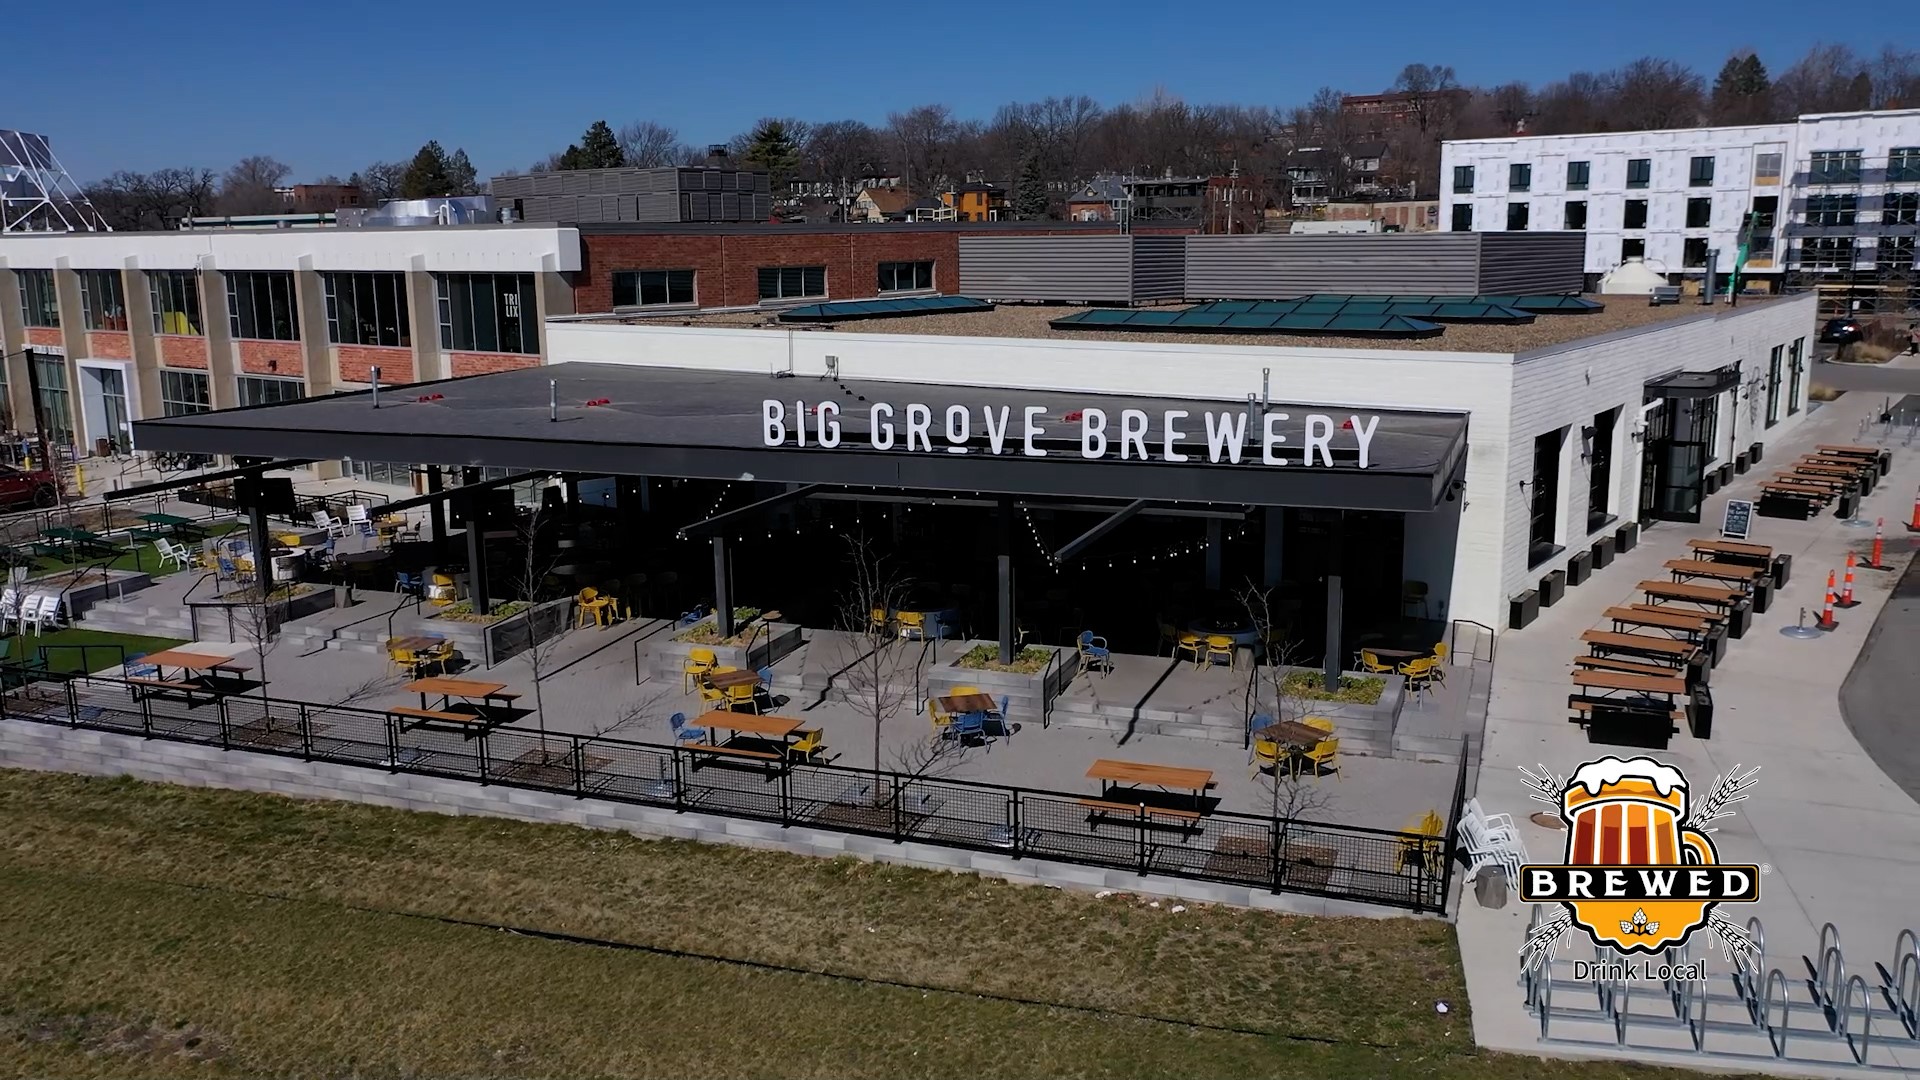 What once was a Chevrolet dealership in Des Moines, Iowa is now one of the newest locations of Big Grove Brewery!